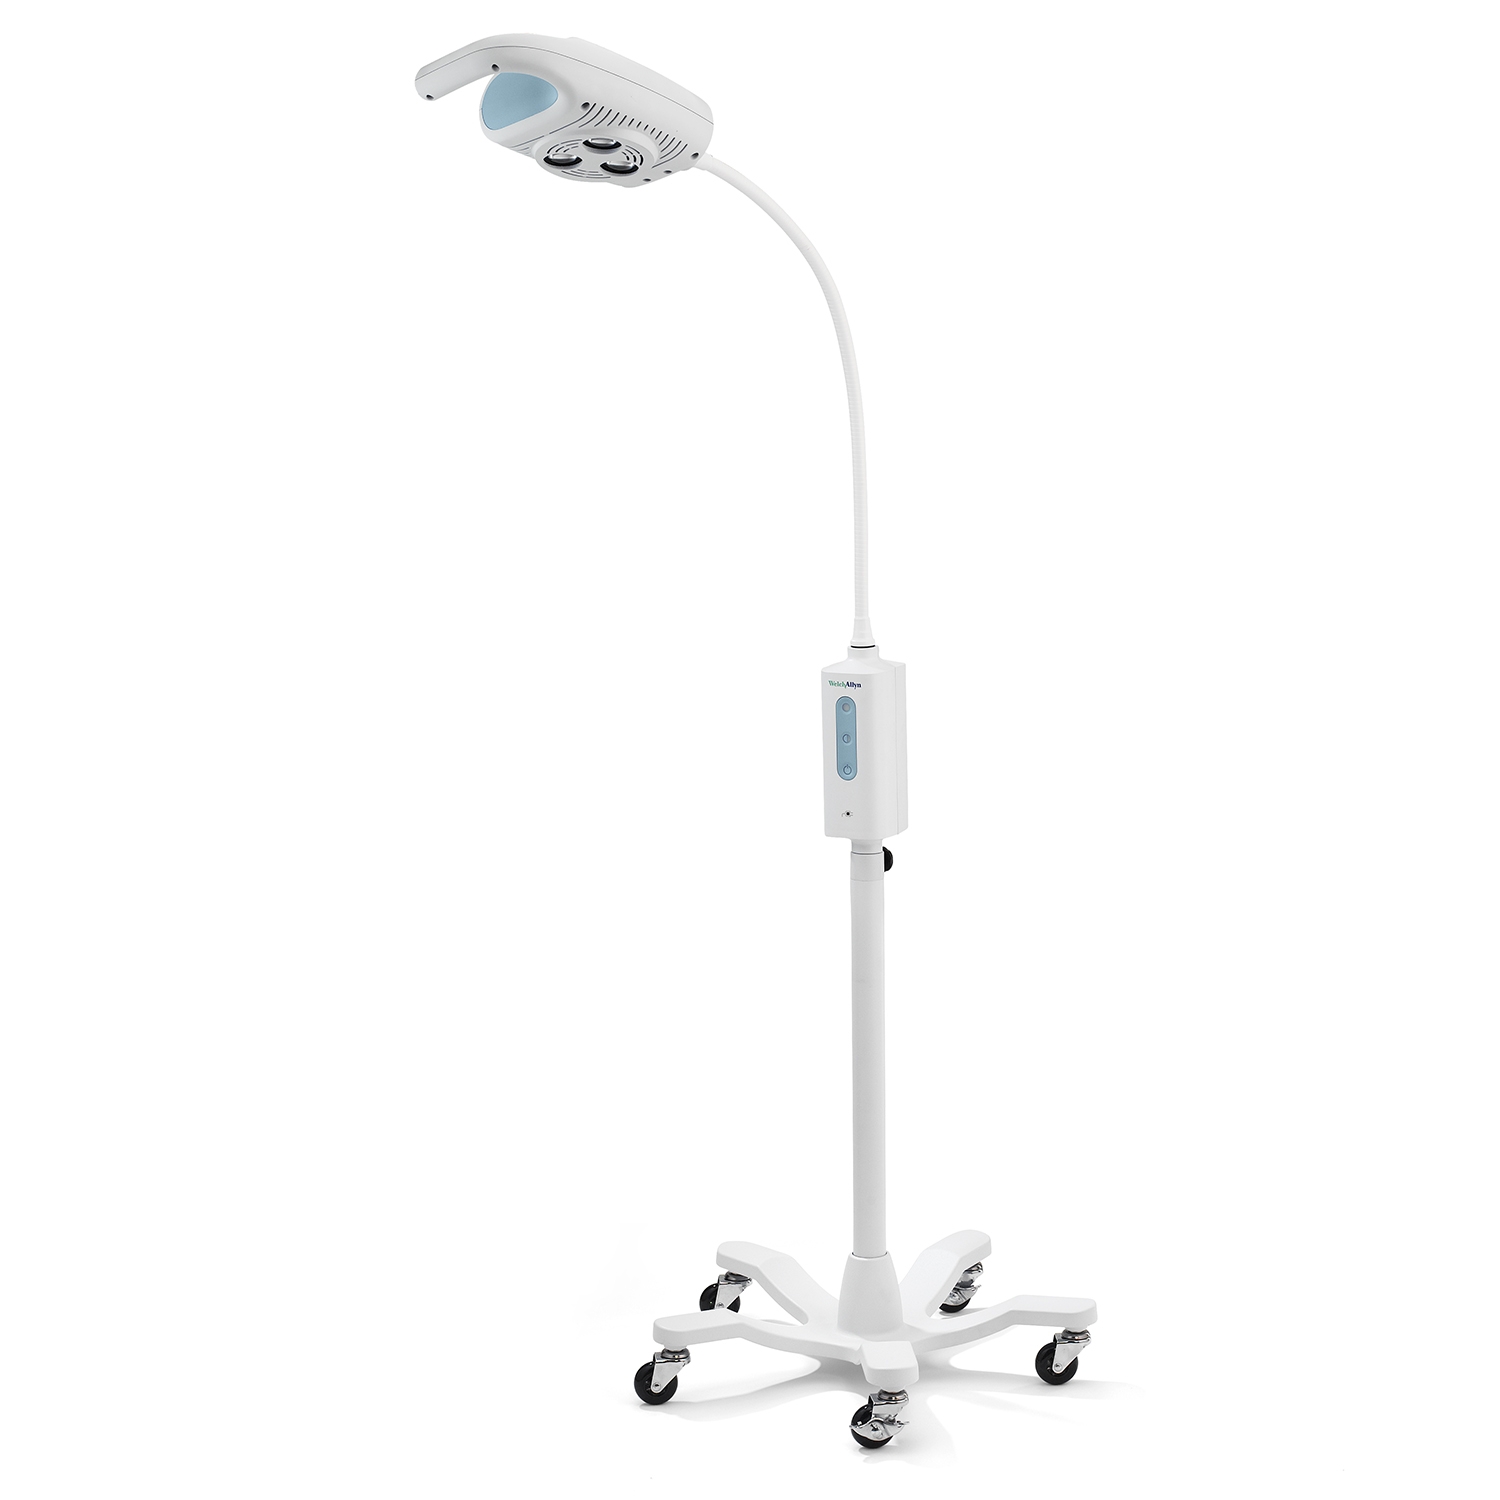 Welch Allyn lampe d'examen GS600 LED + pied roulant